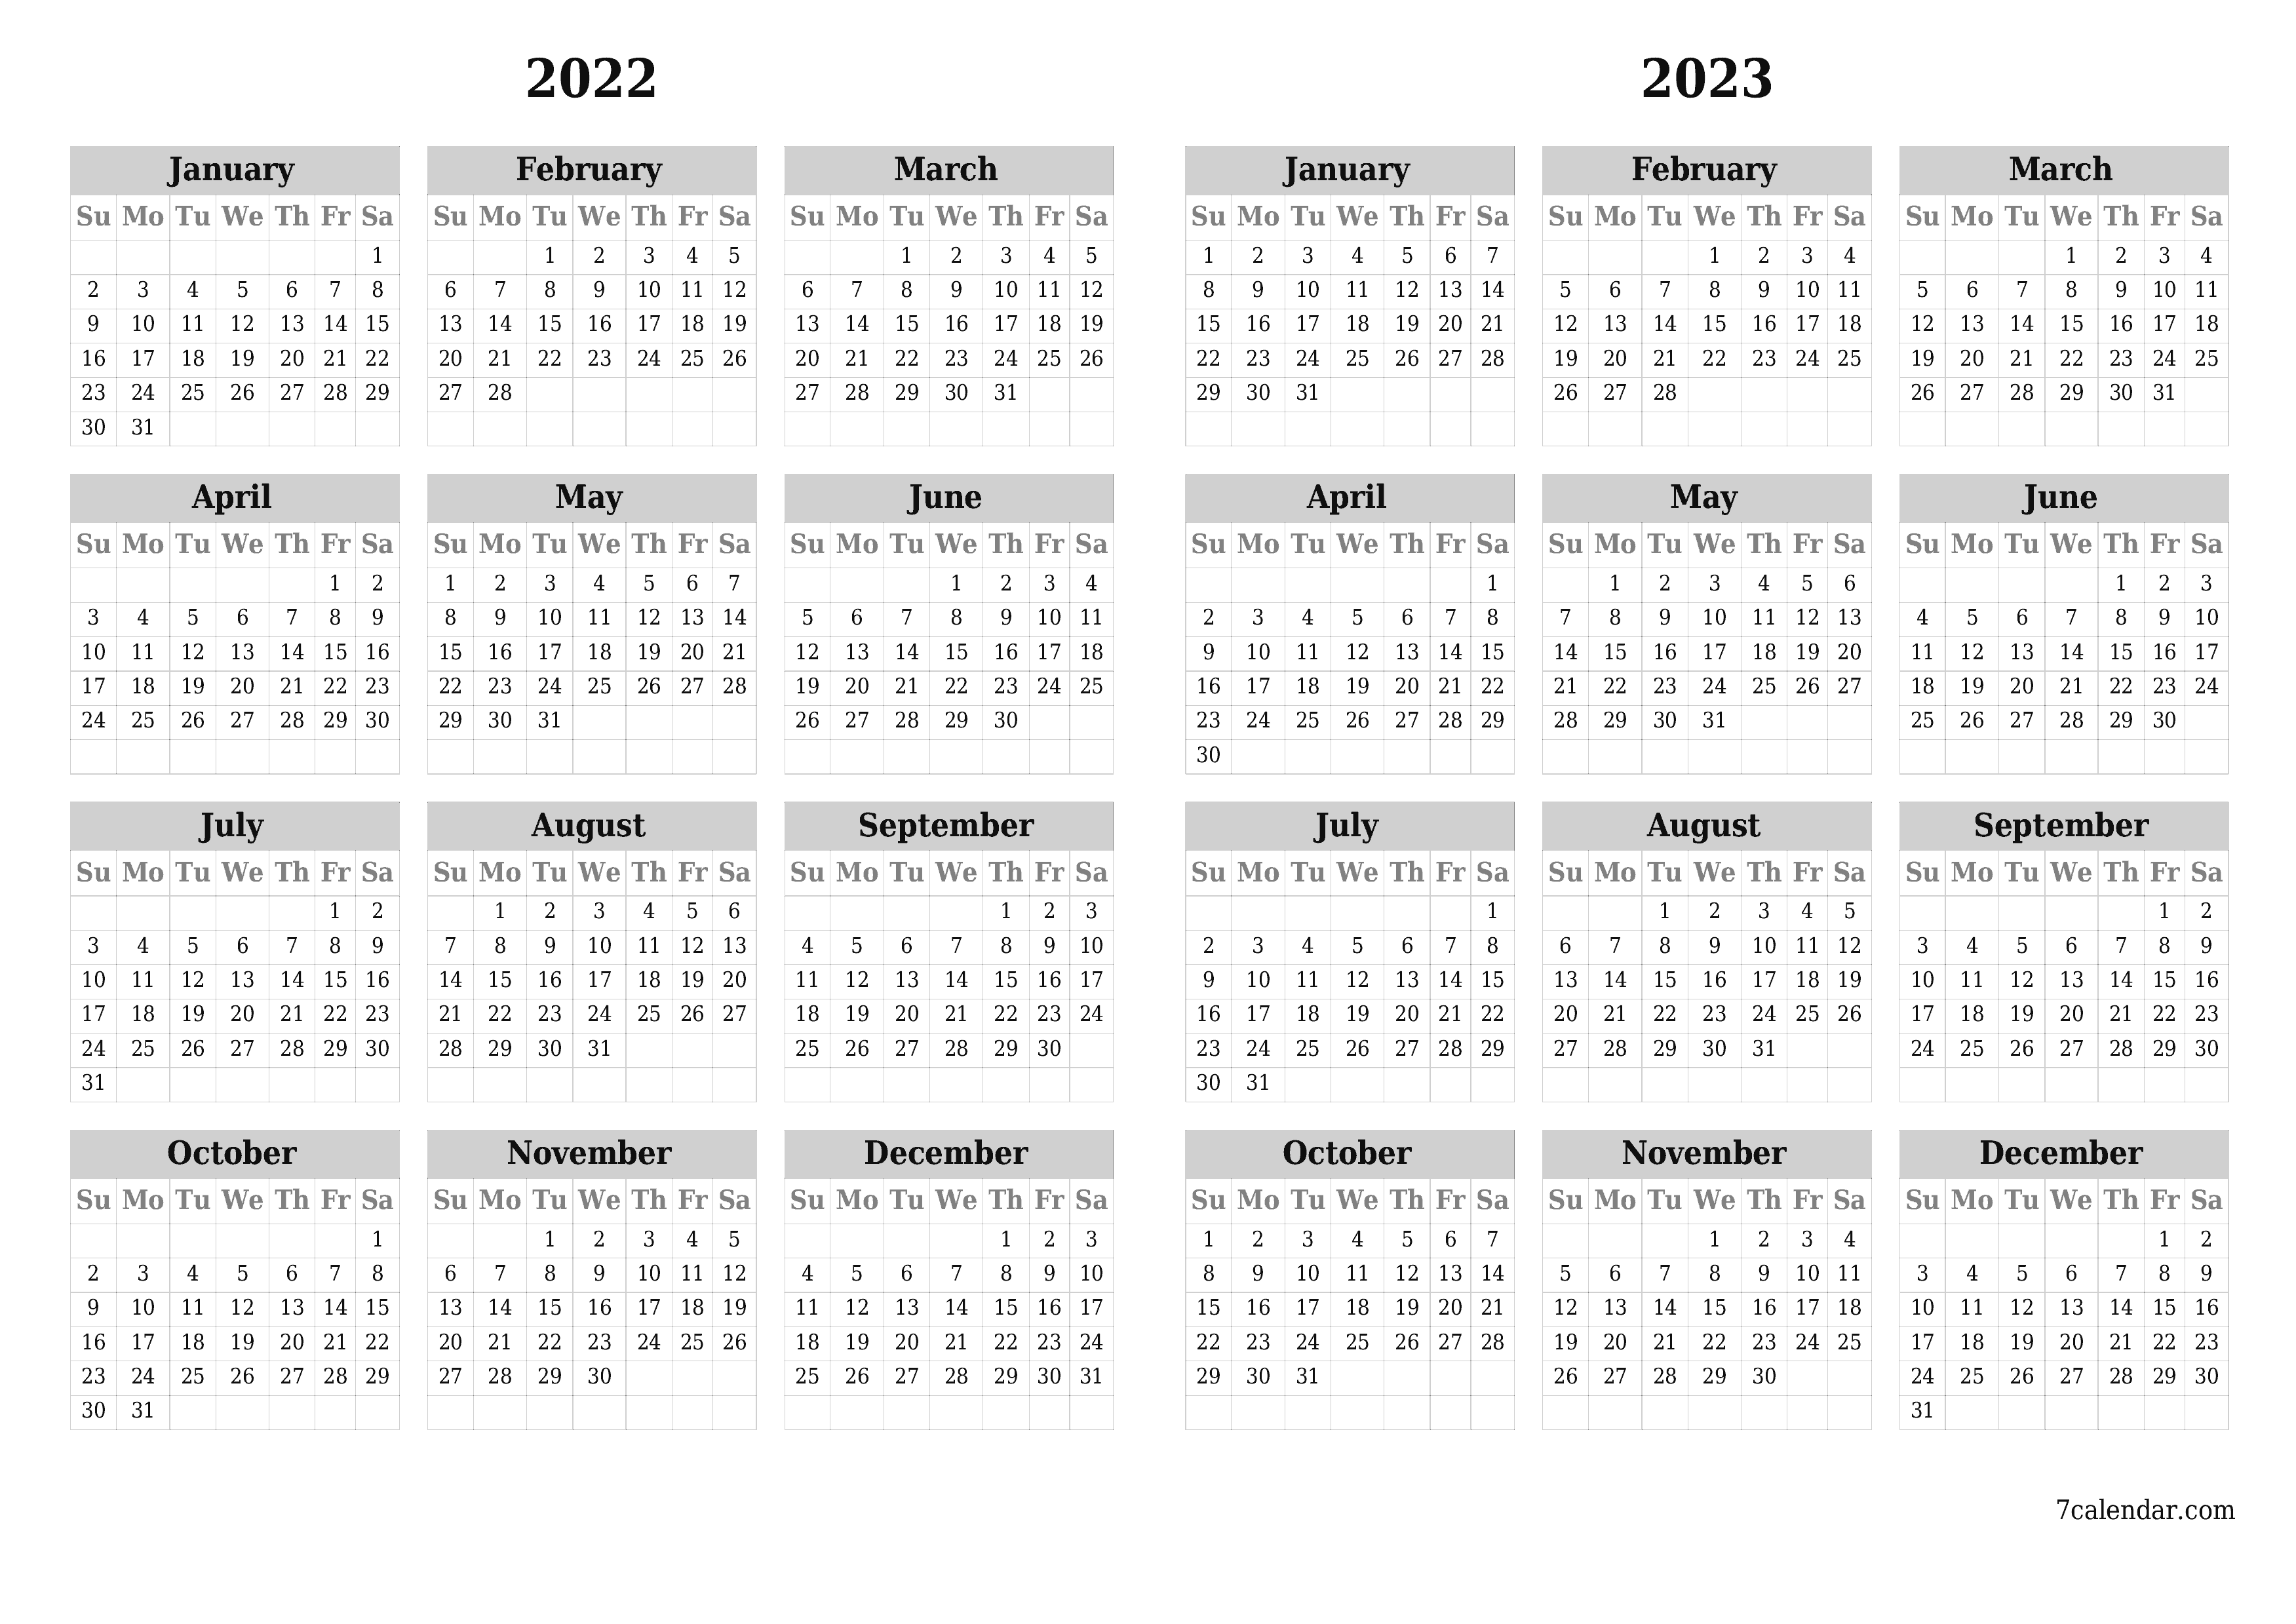 Blank yearly printable calendar and planner for the year 2022, 2023 with notes, save and print to PDF PNG English - 7calendar.com